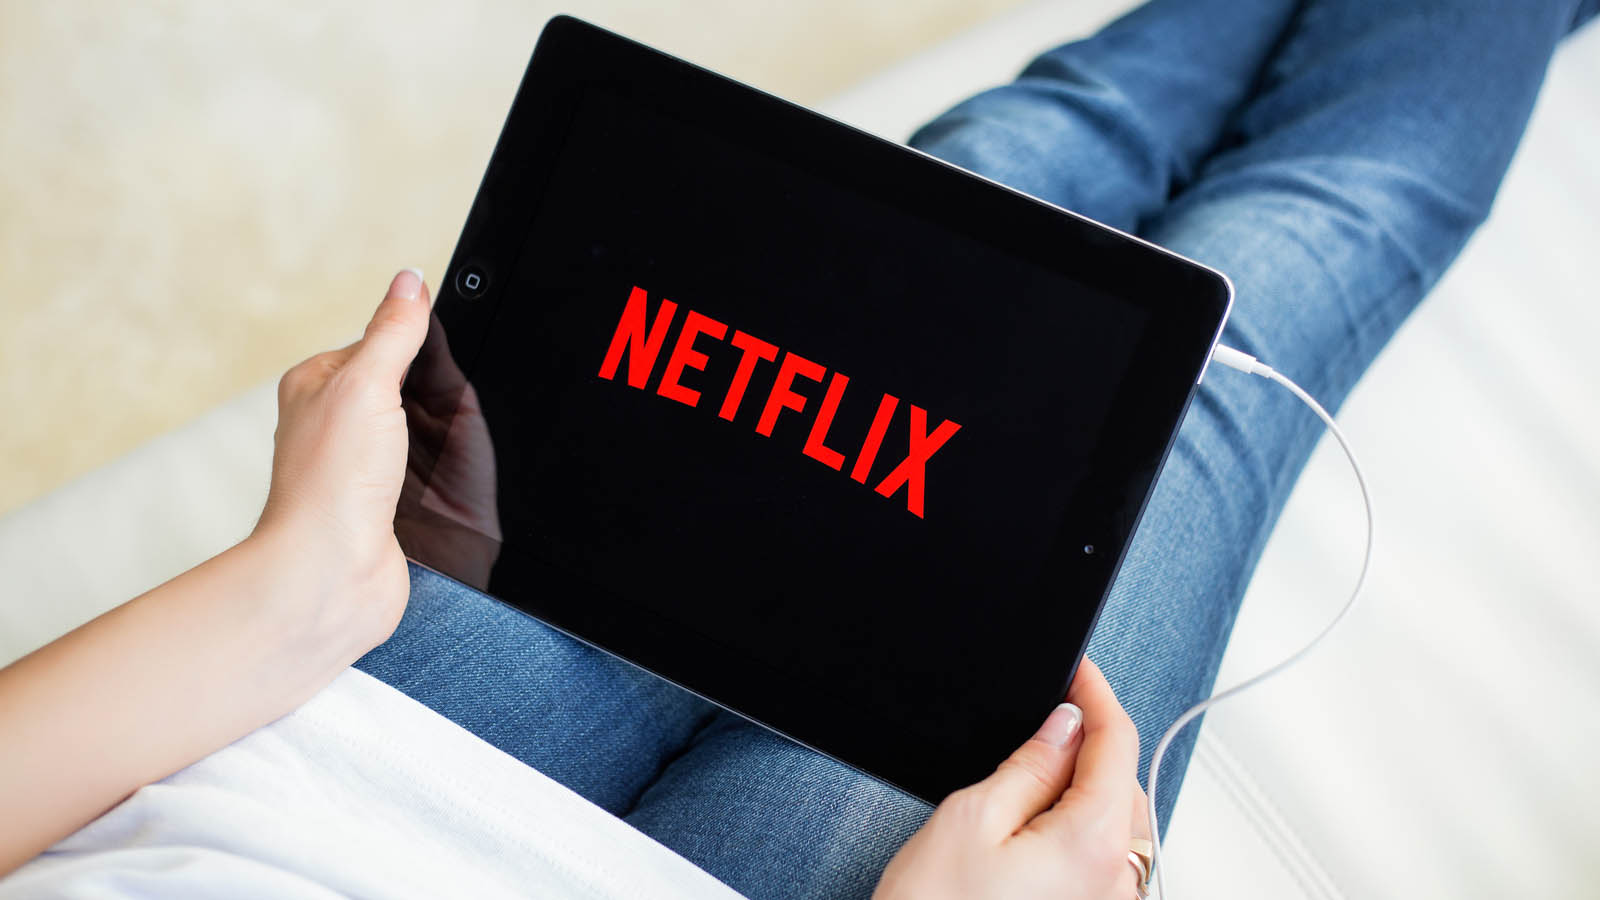 the netflix logo displayed on a tablet that a person is holding while laying down nflx stock